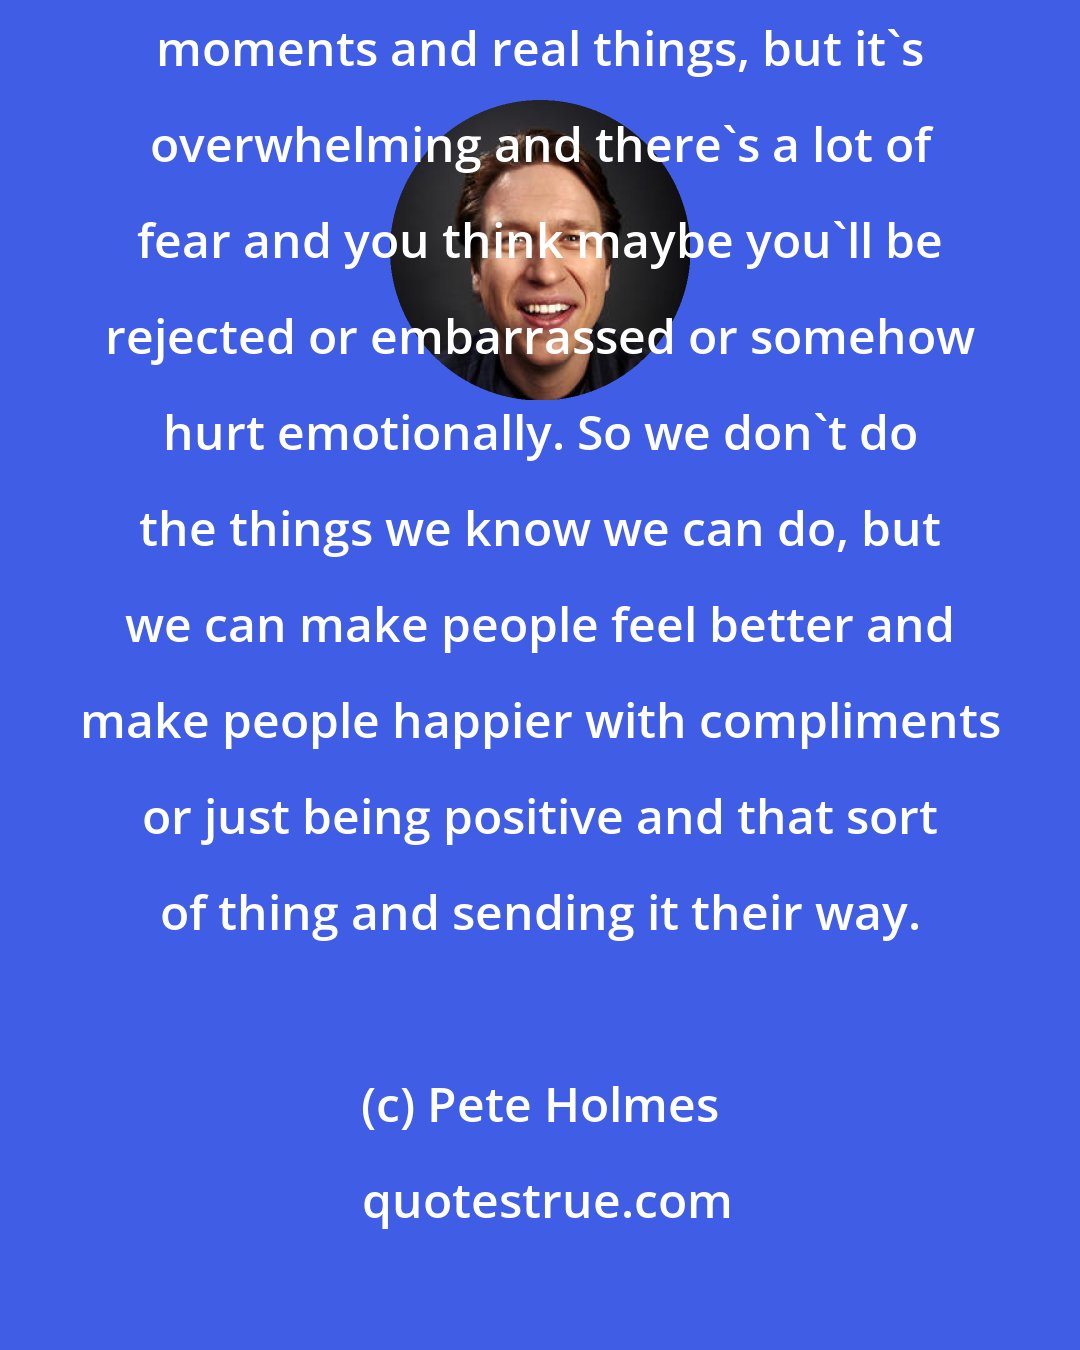 Pete Holmes: One of my obsessions in life is that we have the tools to manufacture moments and real things, but it's overwhelming and there's a lot of fear and you think maybe you'll be rejected or embarrassed or somehow hurt emotionally. So we don't do the things we know we can do, but we can make people feel better and make people happier with compliments or just being positive and that sort of thing and sending it their way.